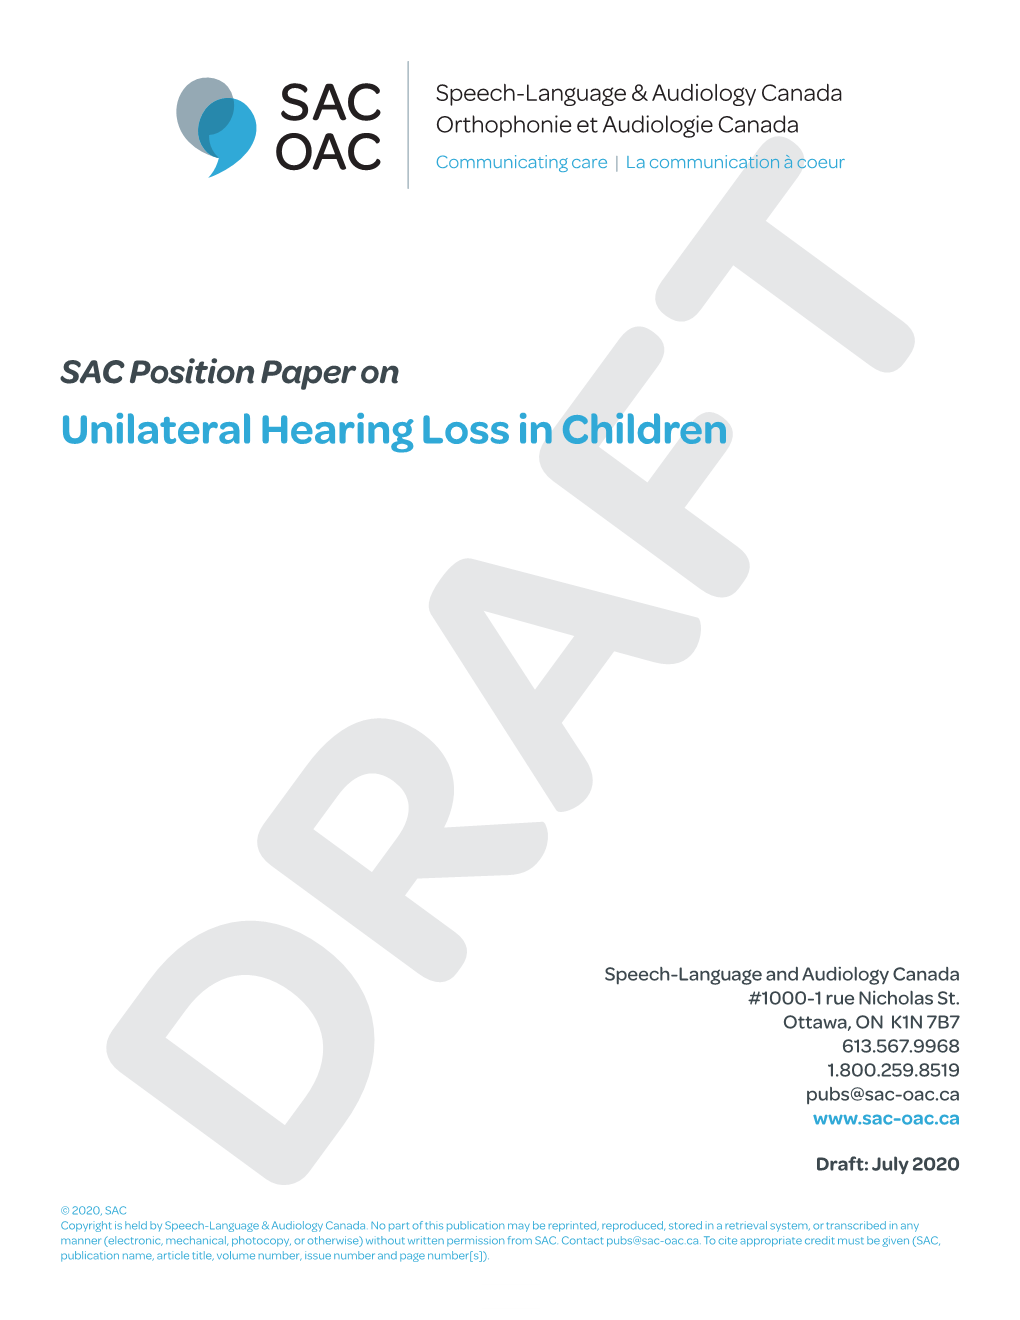 SAC Position Paper on Unilateral Hearing Loss in Children